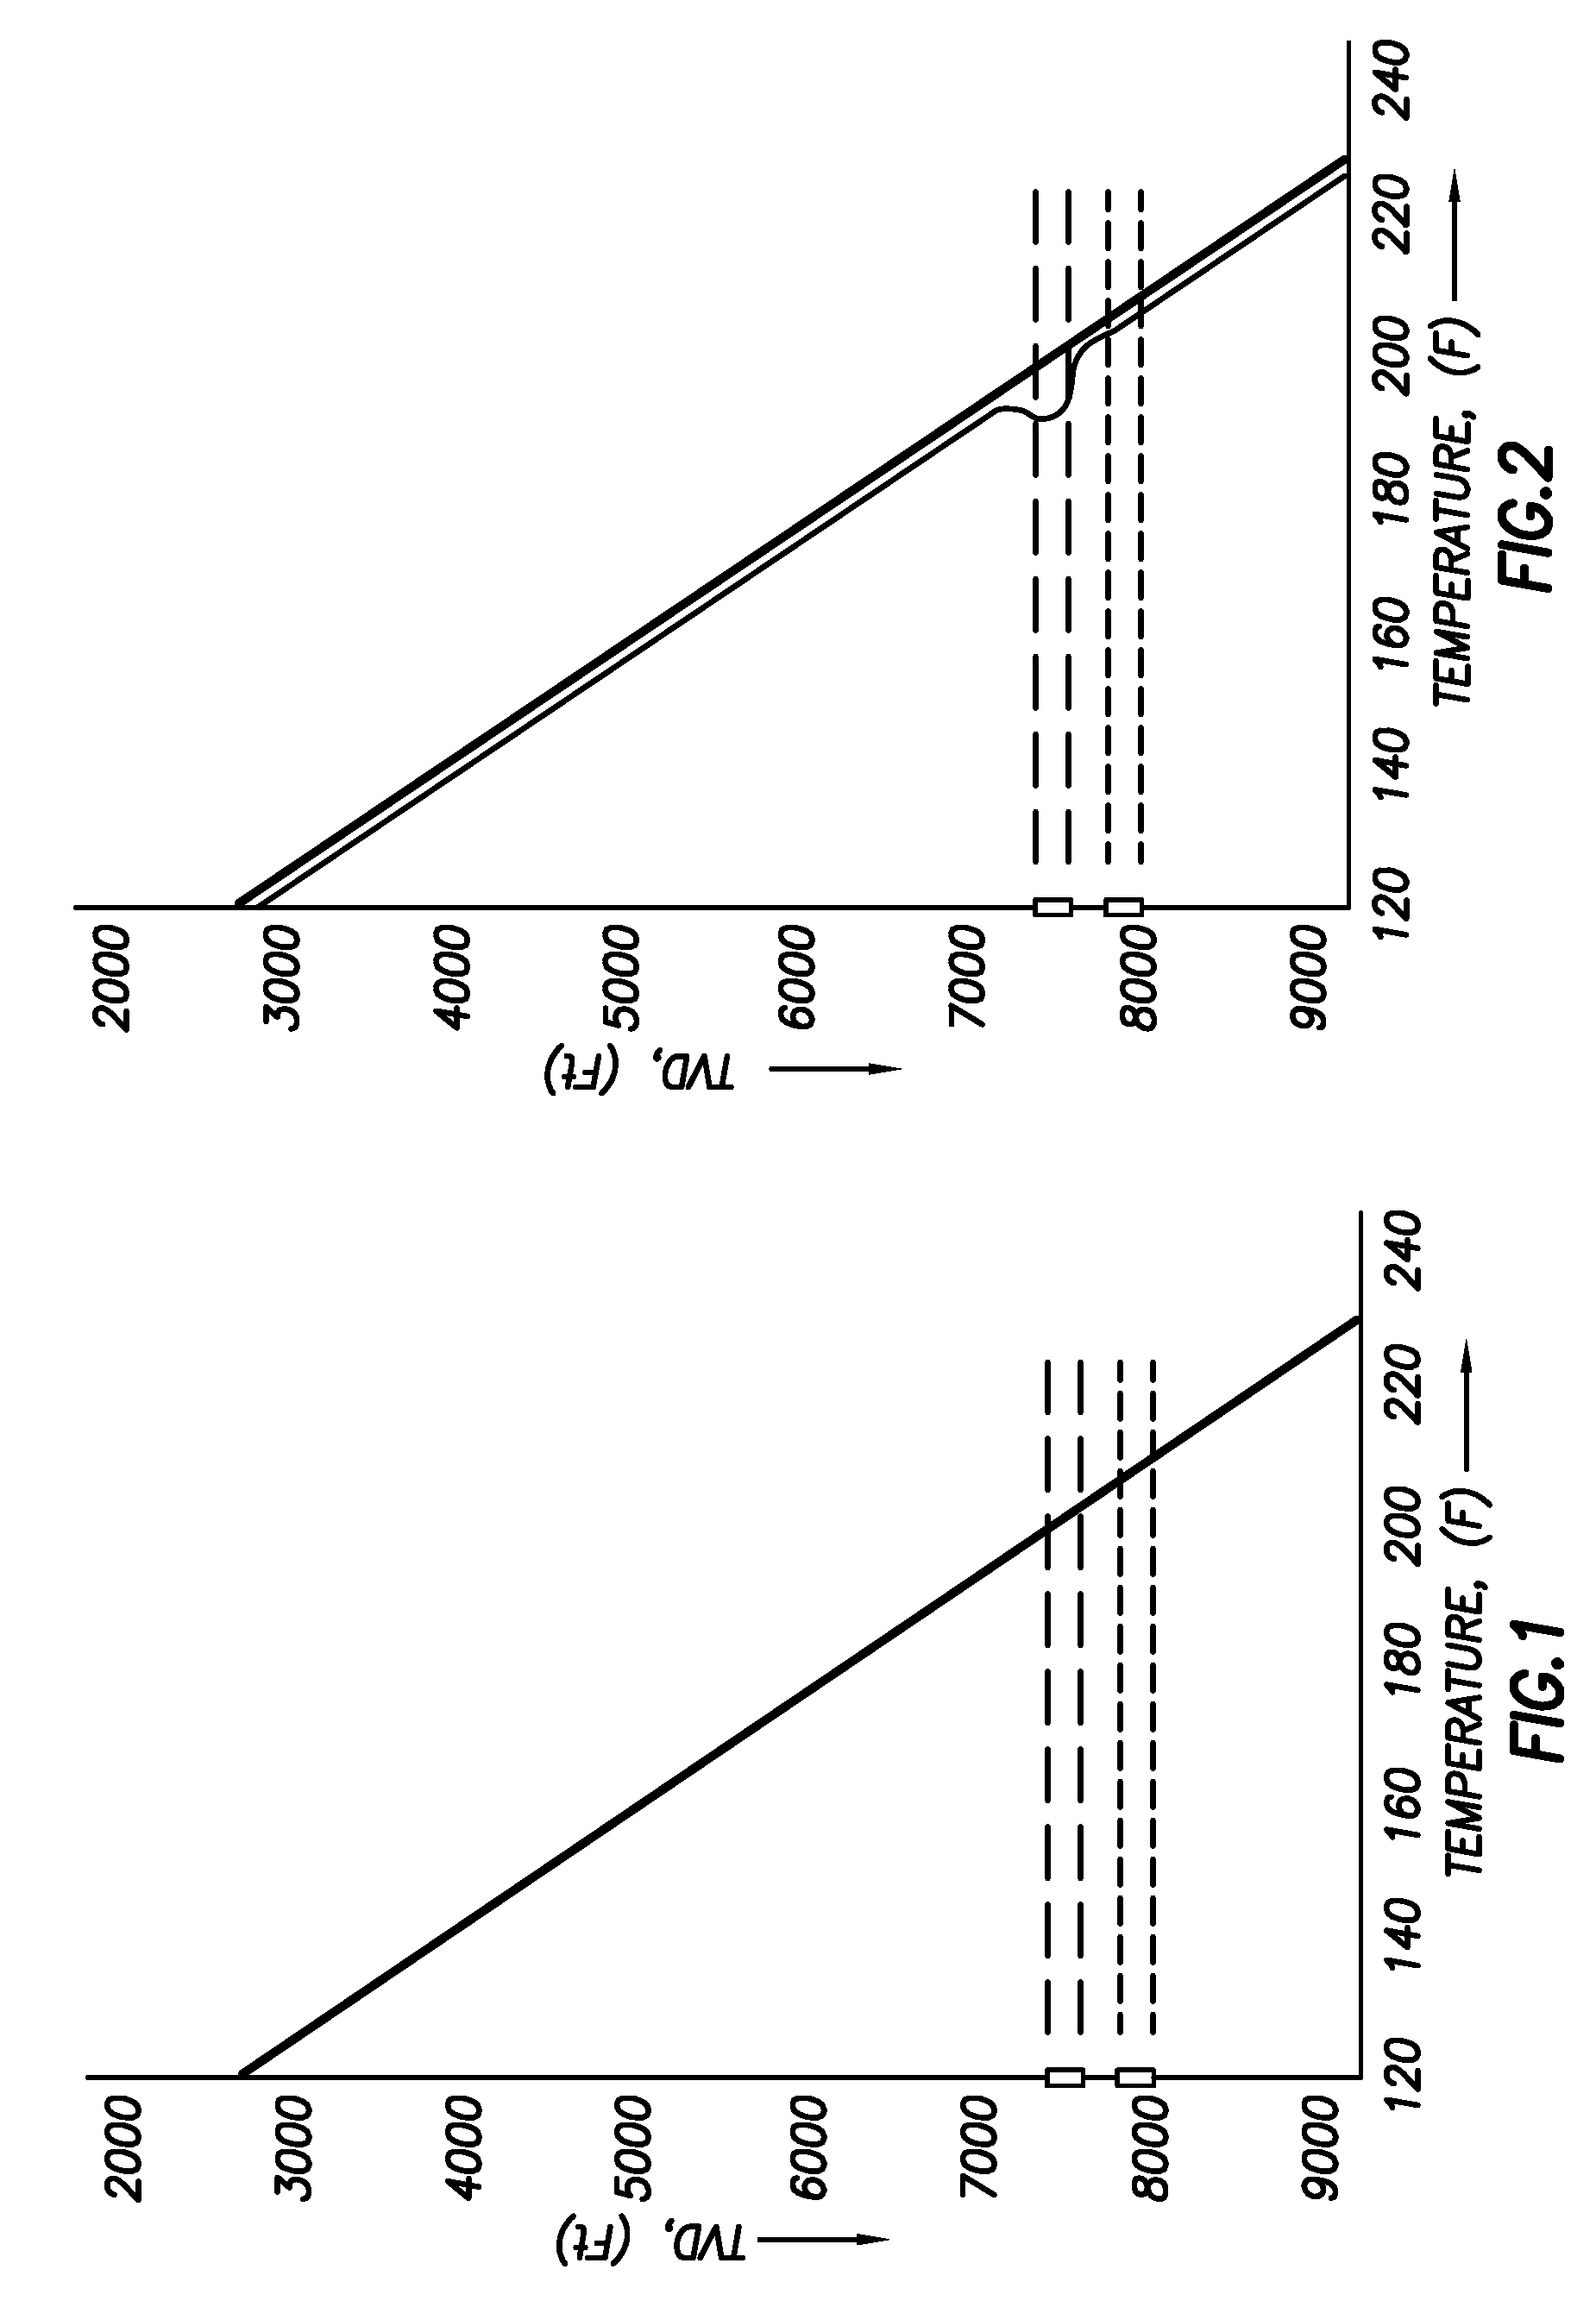 Use of distributed temperature sensors during wellbore treatments